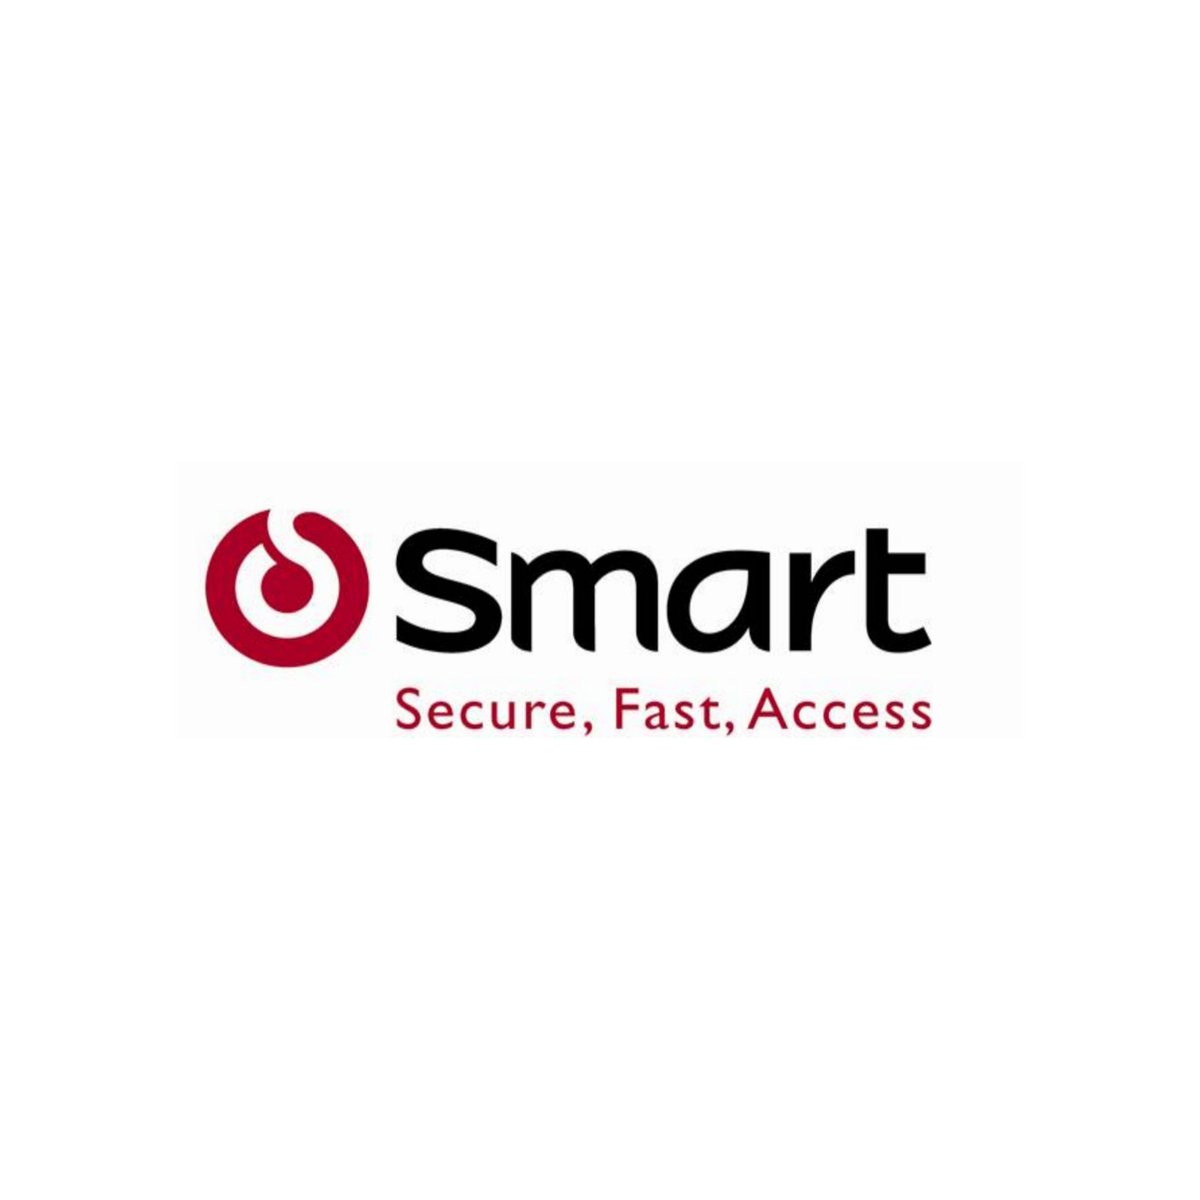 Today for our #MemberMoment, we spotlight @SmartApp_UG providing innovative, secure, & high-tech solutions with a mission to make access to healthcare services convenient for everyone through a diverse portfolio of services in Healthcare, insurance, etc. uganda.smartapplicationsgroup.com